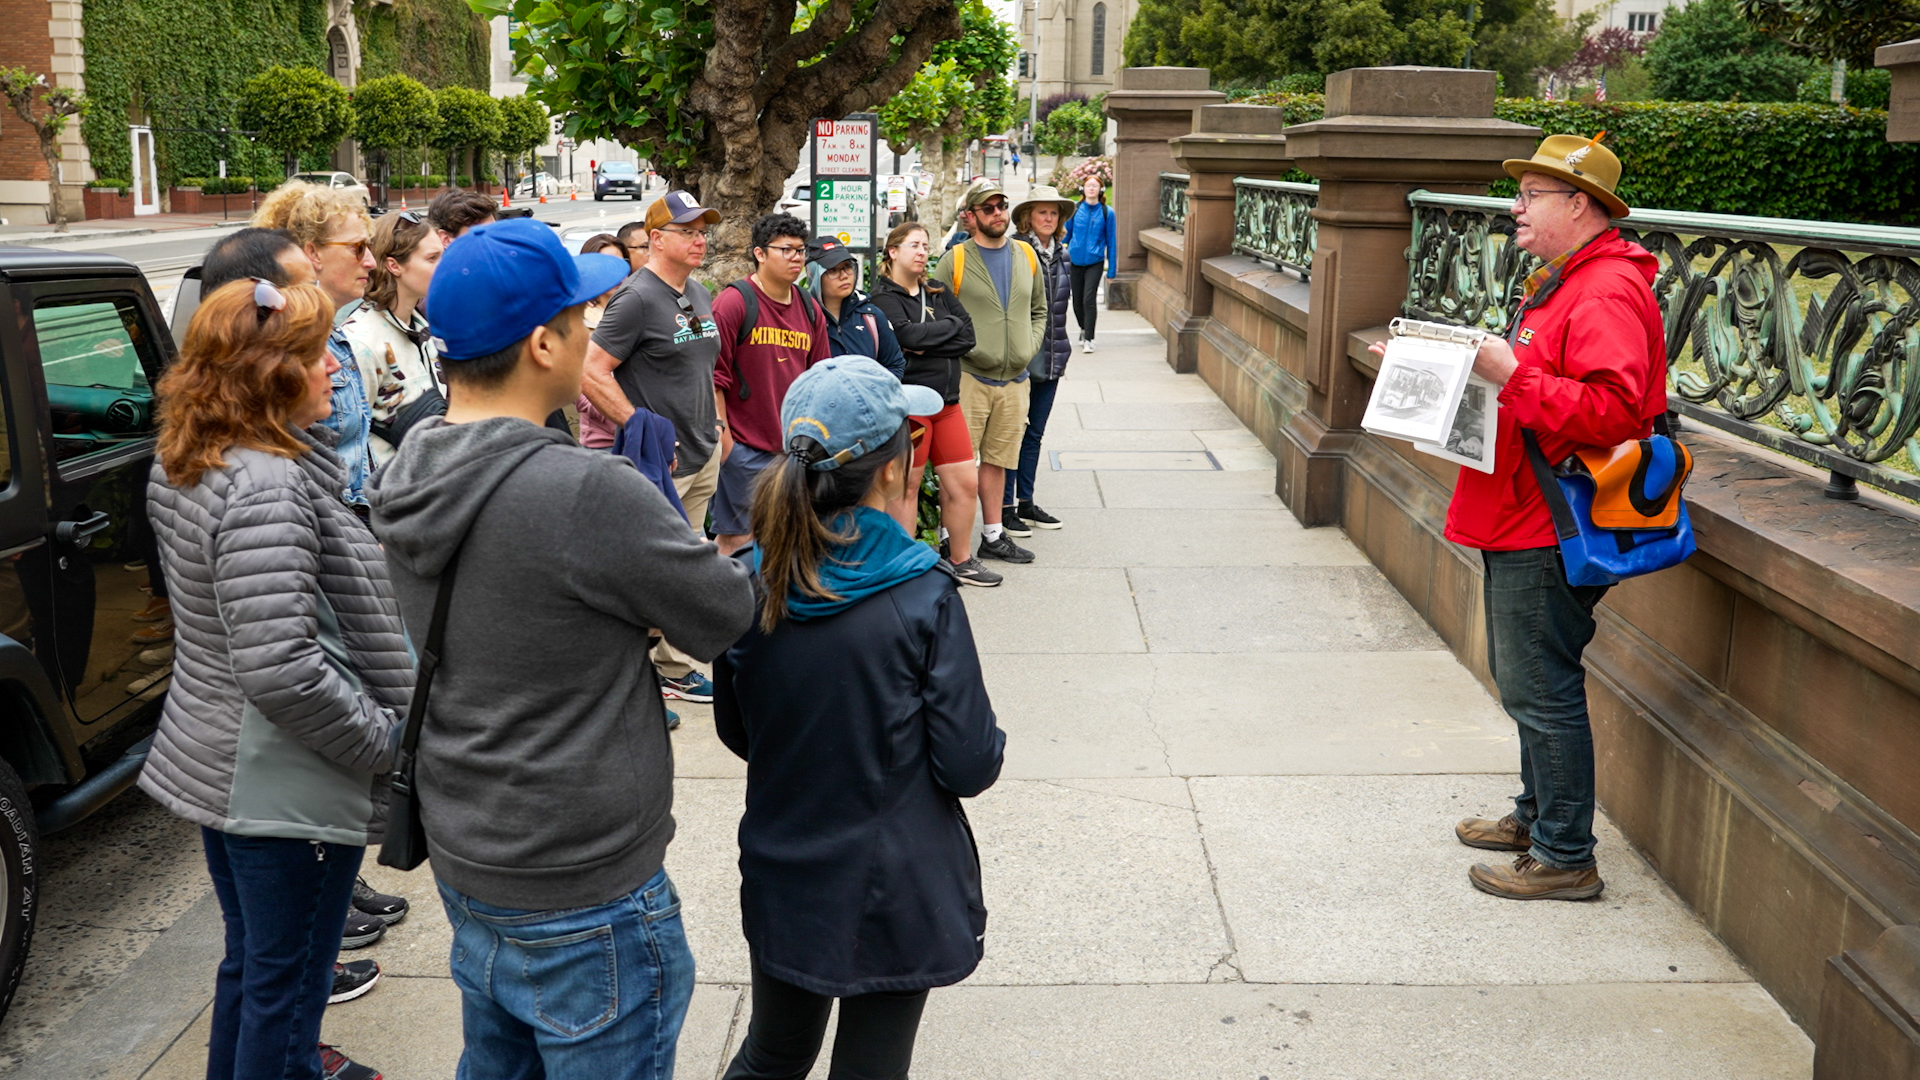 A group of 16 people stands around a tour guide in a red jacket on a sidewalk.